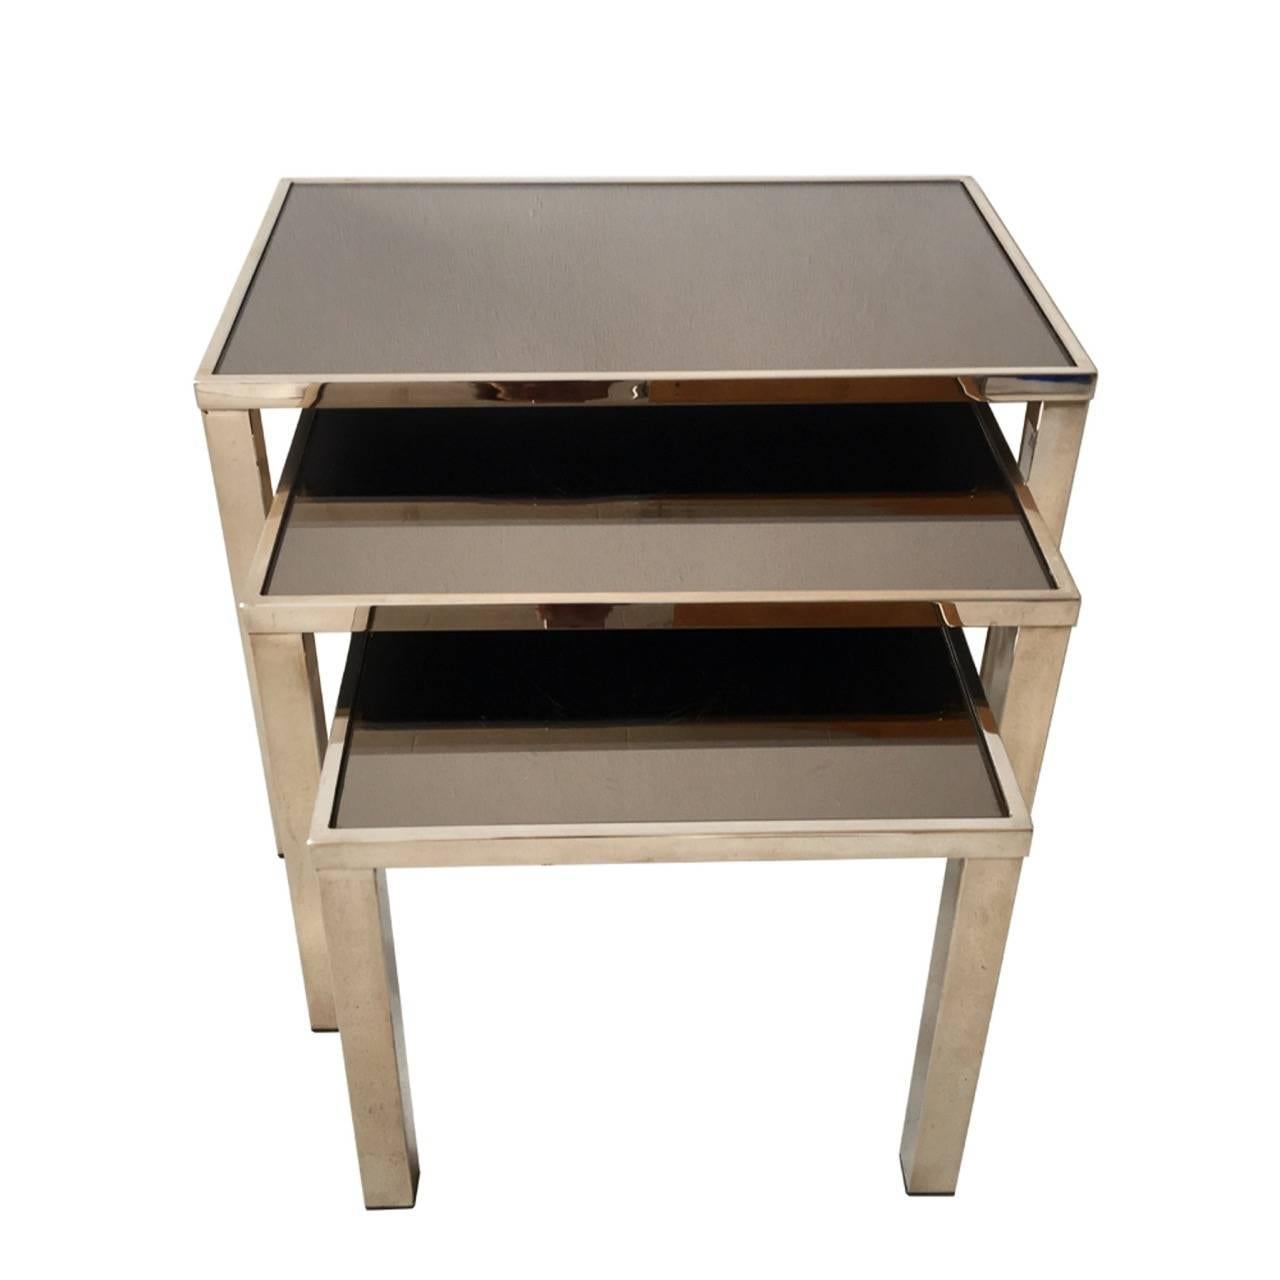 Rare Set of 23-Carat Gold Plated Nesting Tables by Belgo Chrome, Belgium, 1960s For Sale